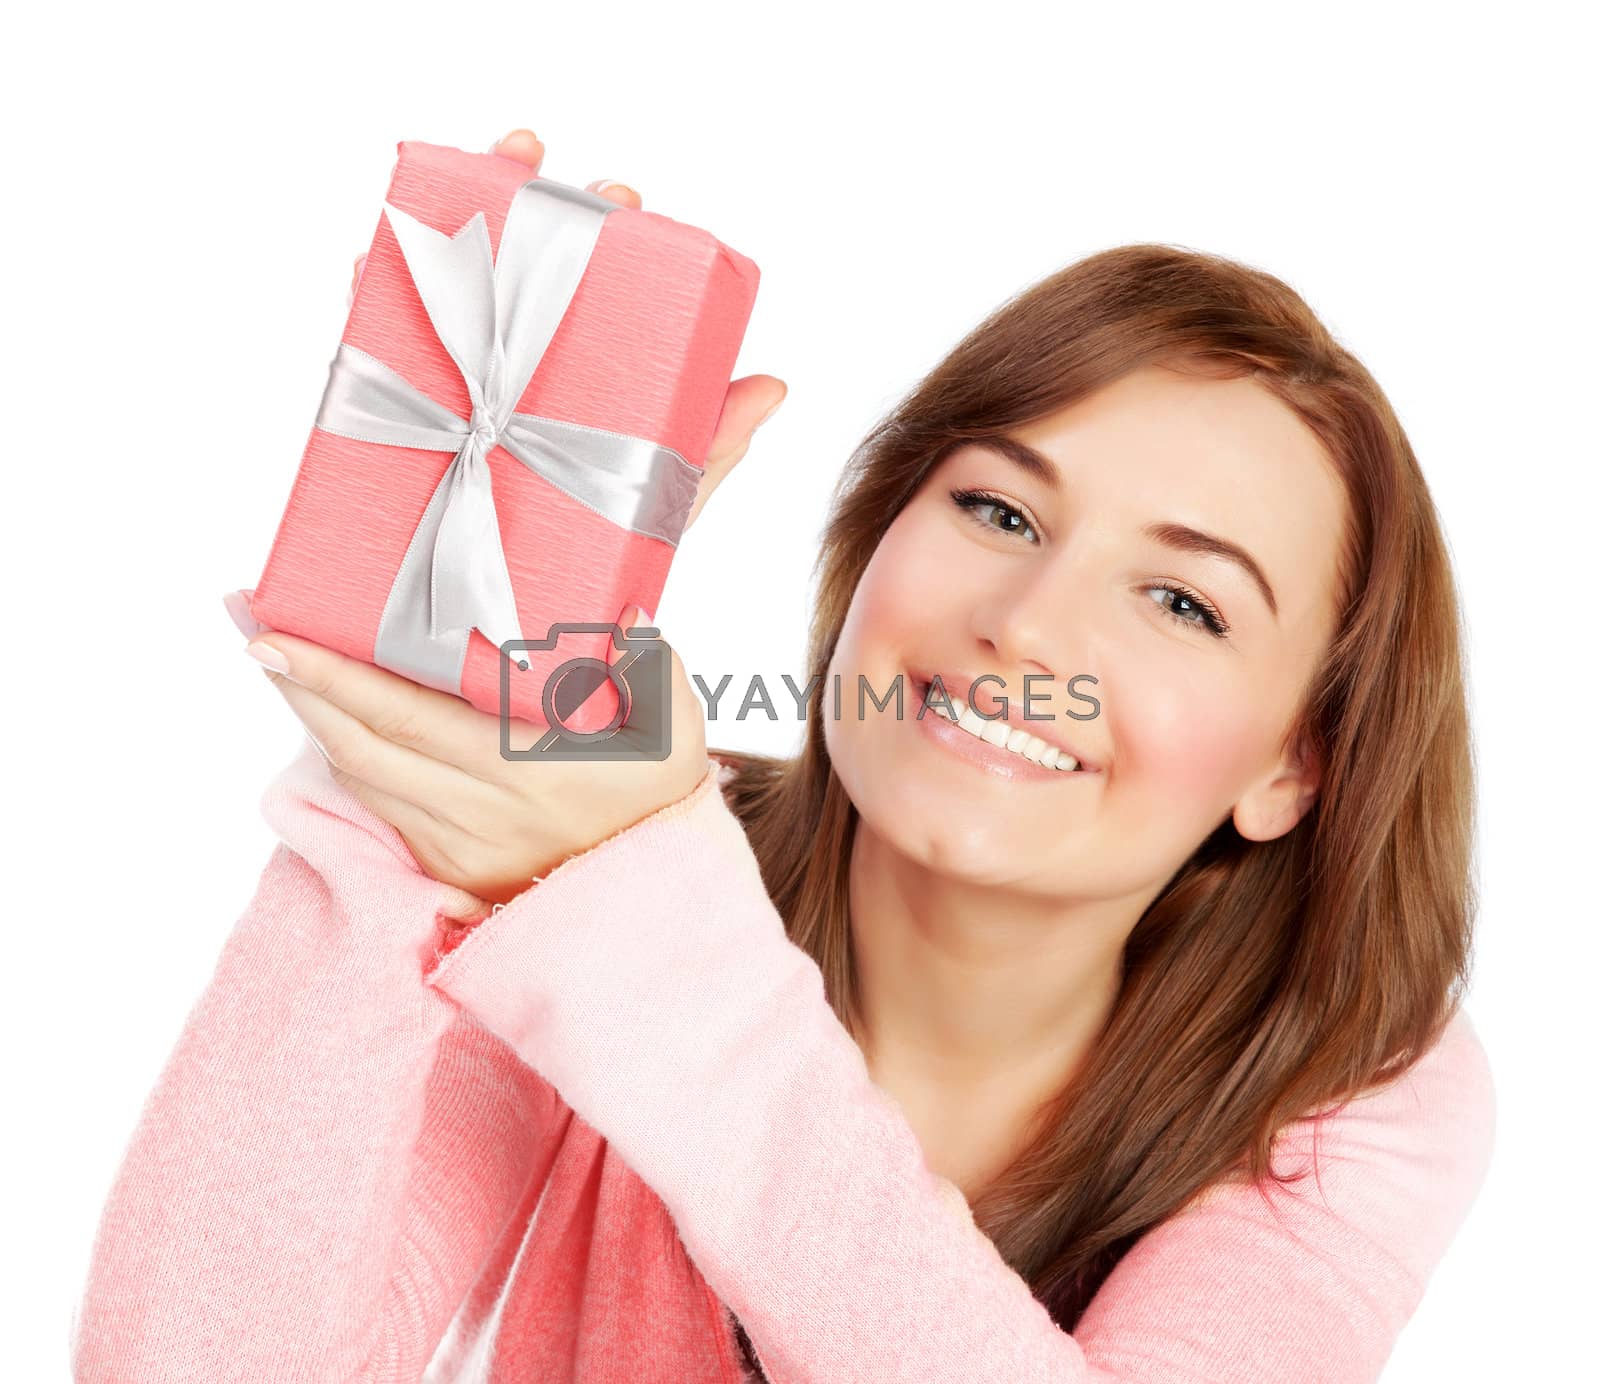 Royalty free image of Cheerful female with gift by Anna_Omelchenko